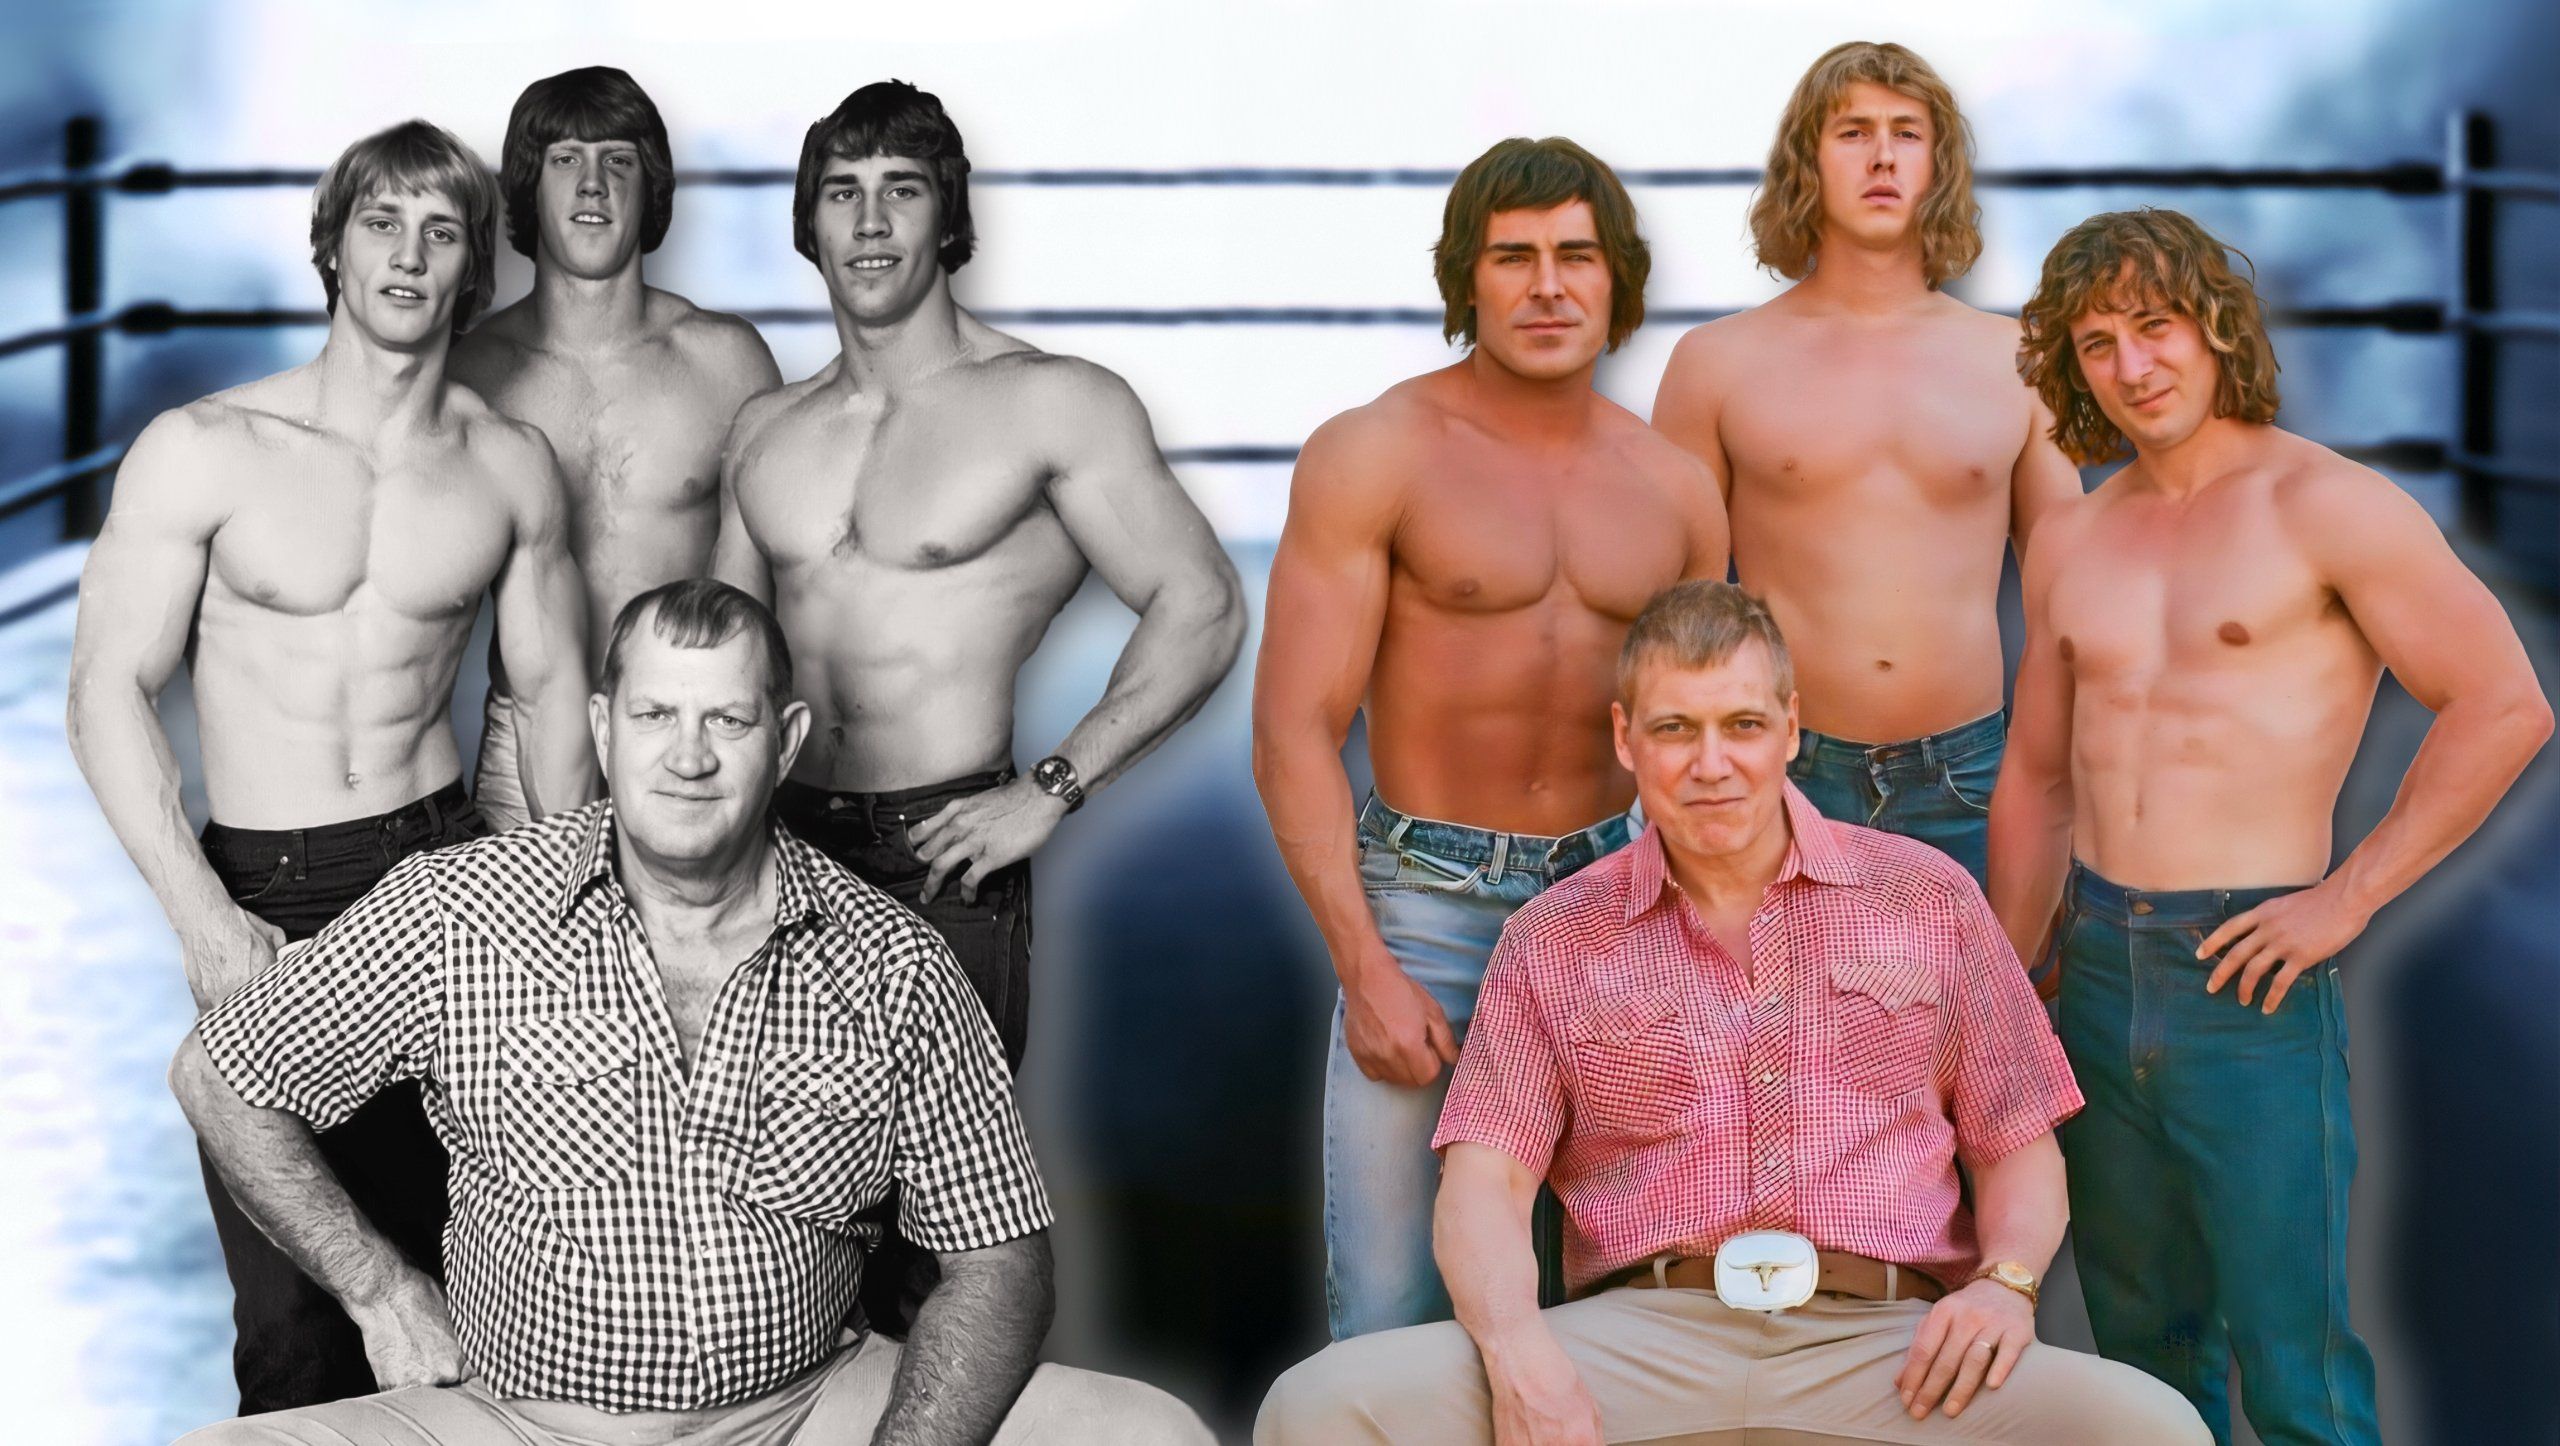 Kevin Von Erich Discusses the Depiction of His Family in The Iron Claw